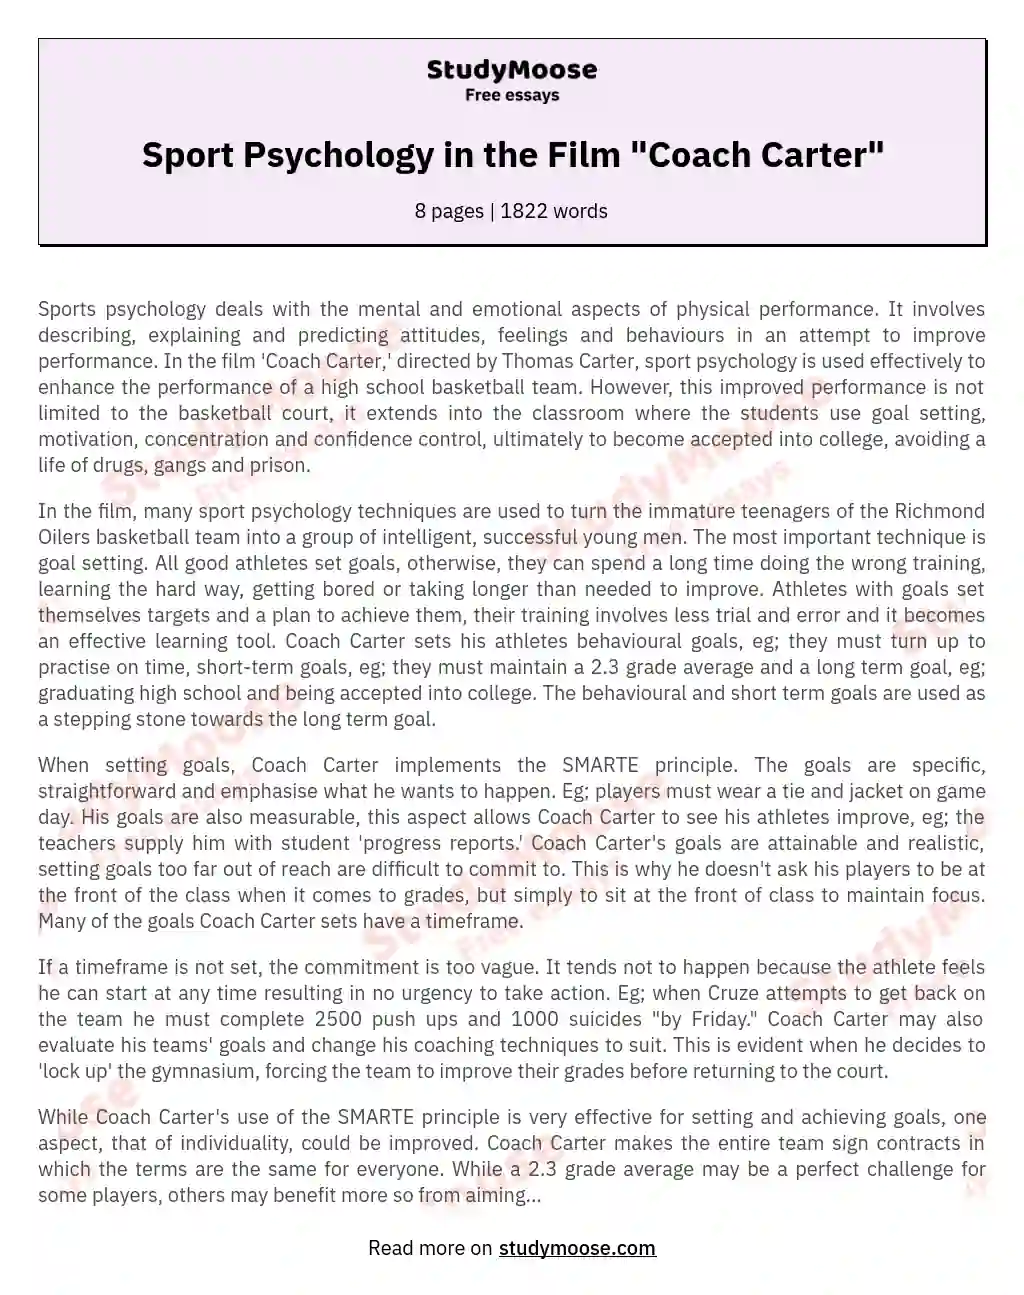 Sport Psychology in the Film "Coach Carter"